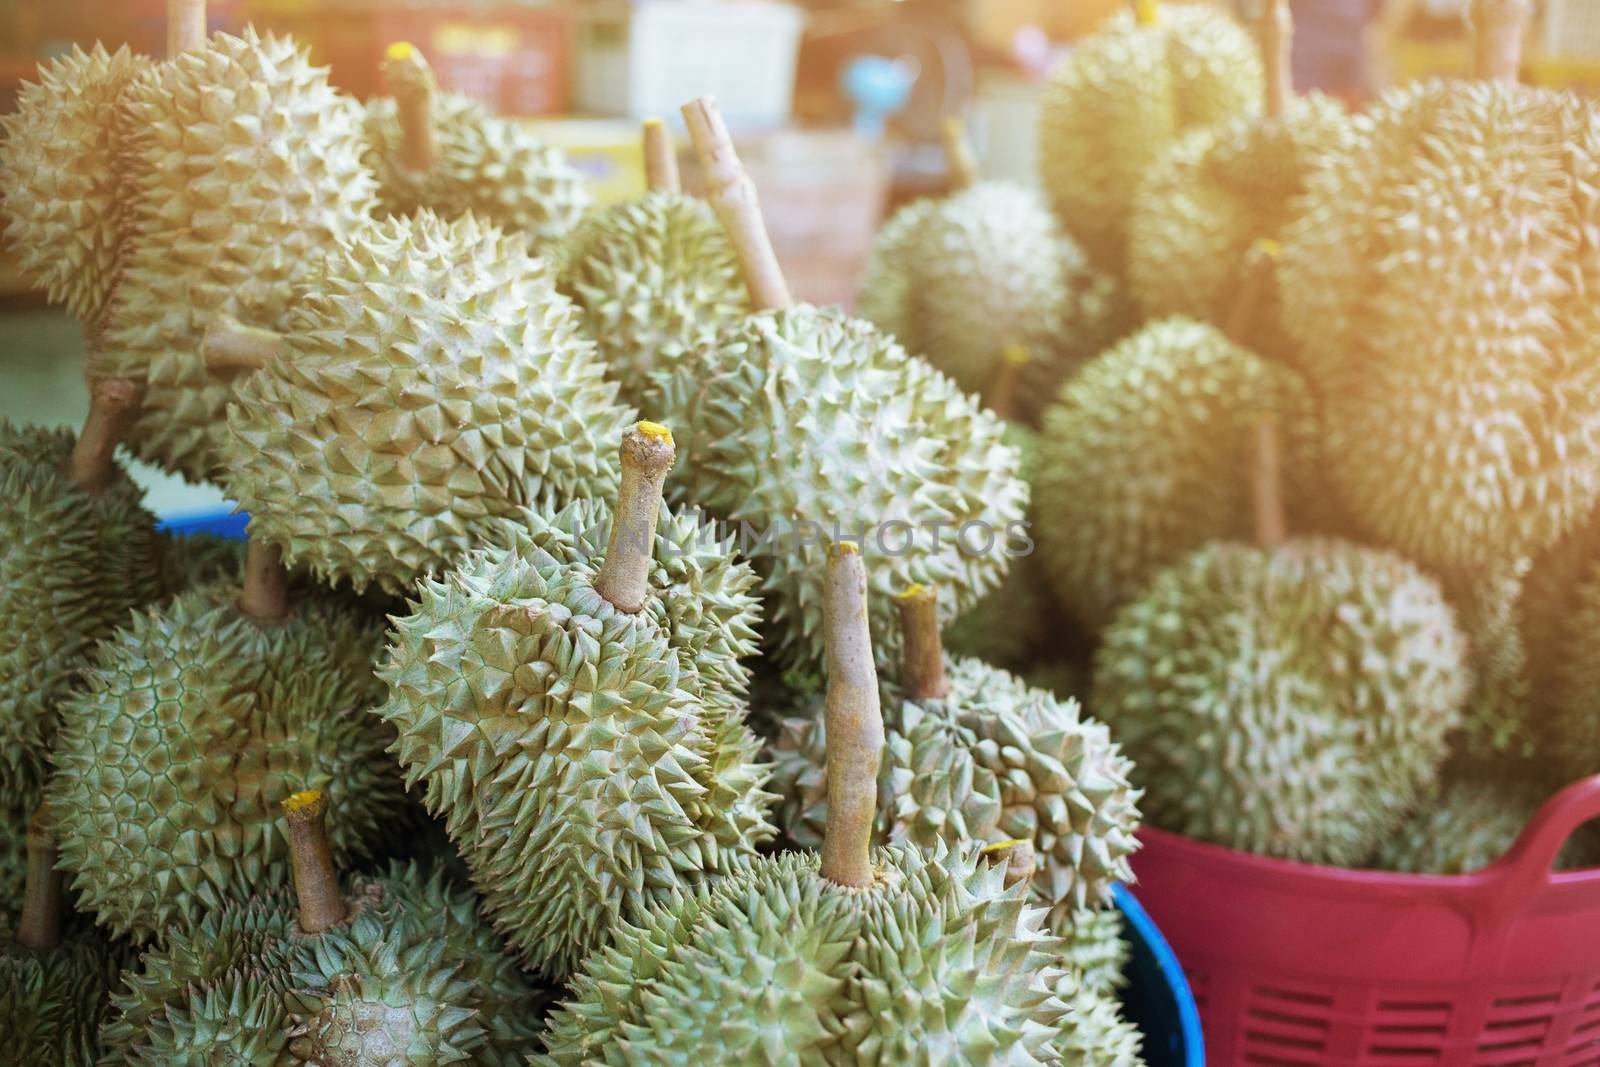 Durian is in the market by boytaro1428@gmail.com